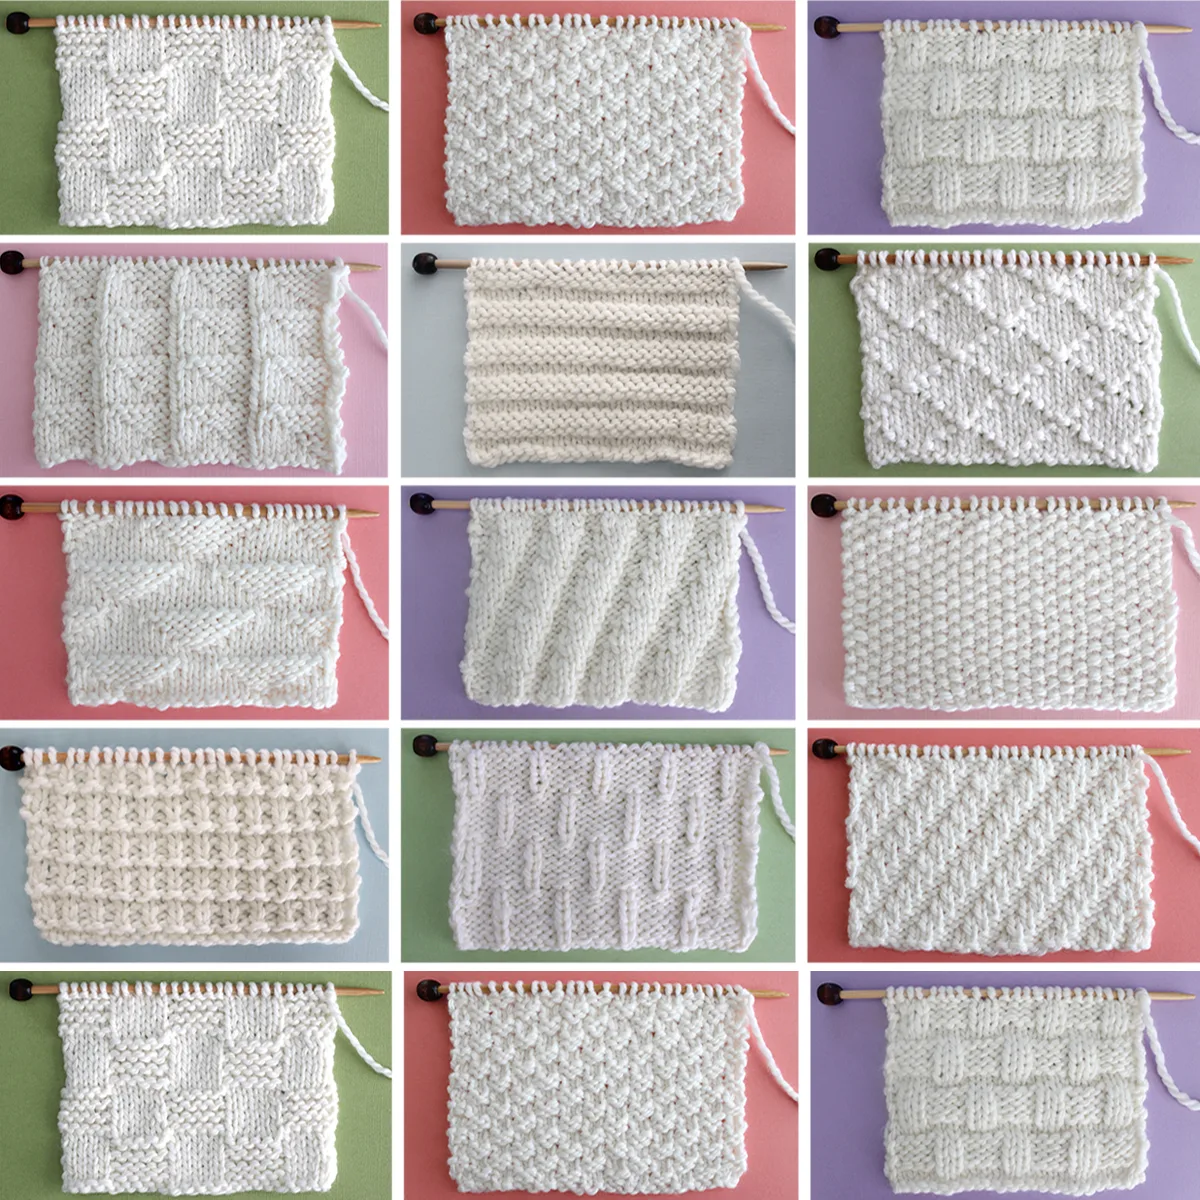 different types of knitting stitches